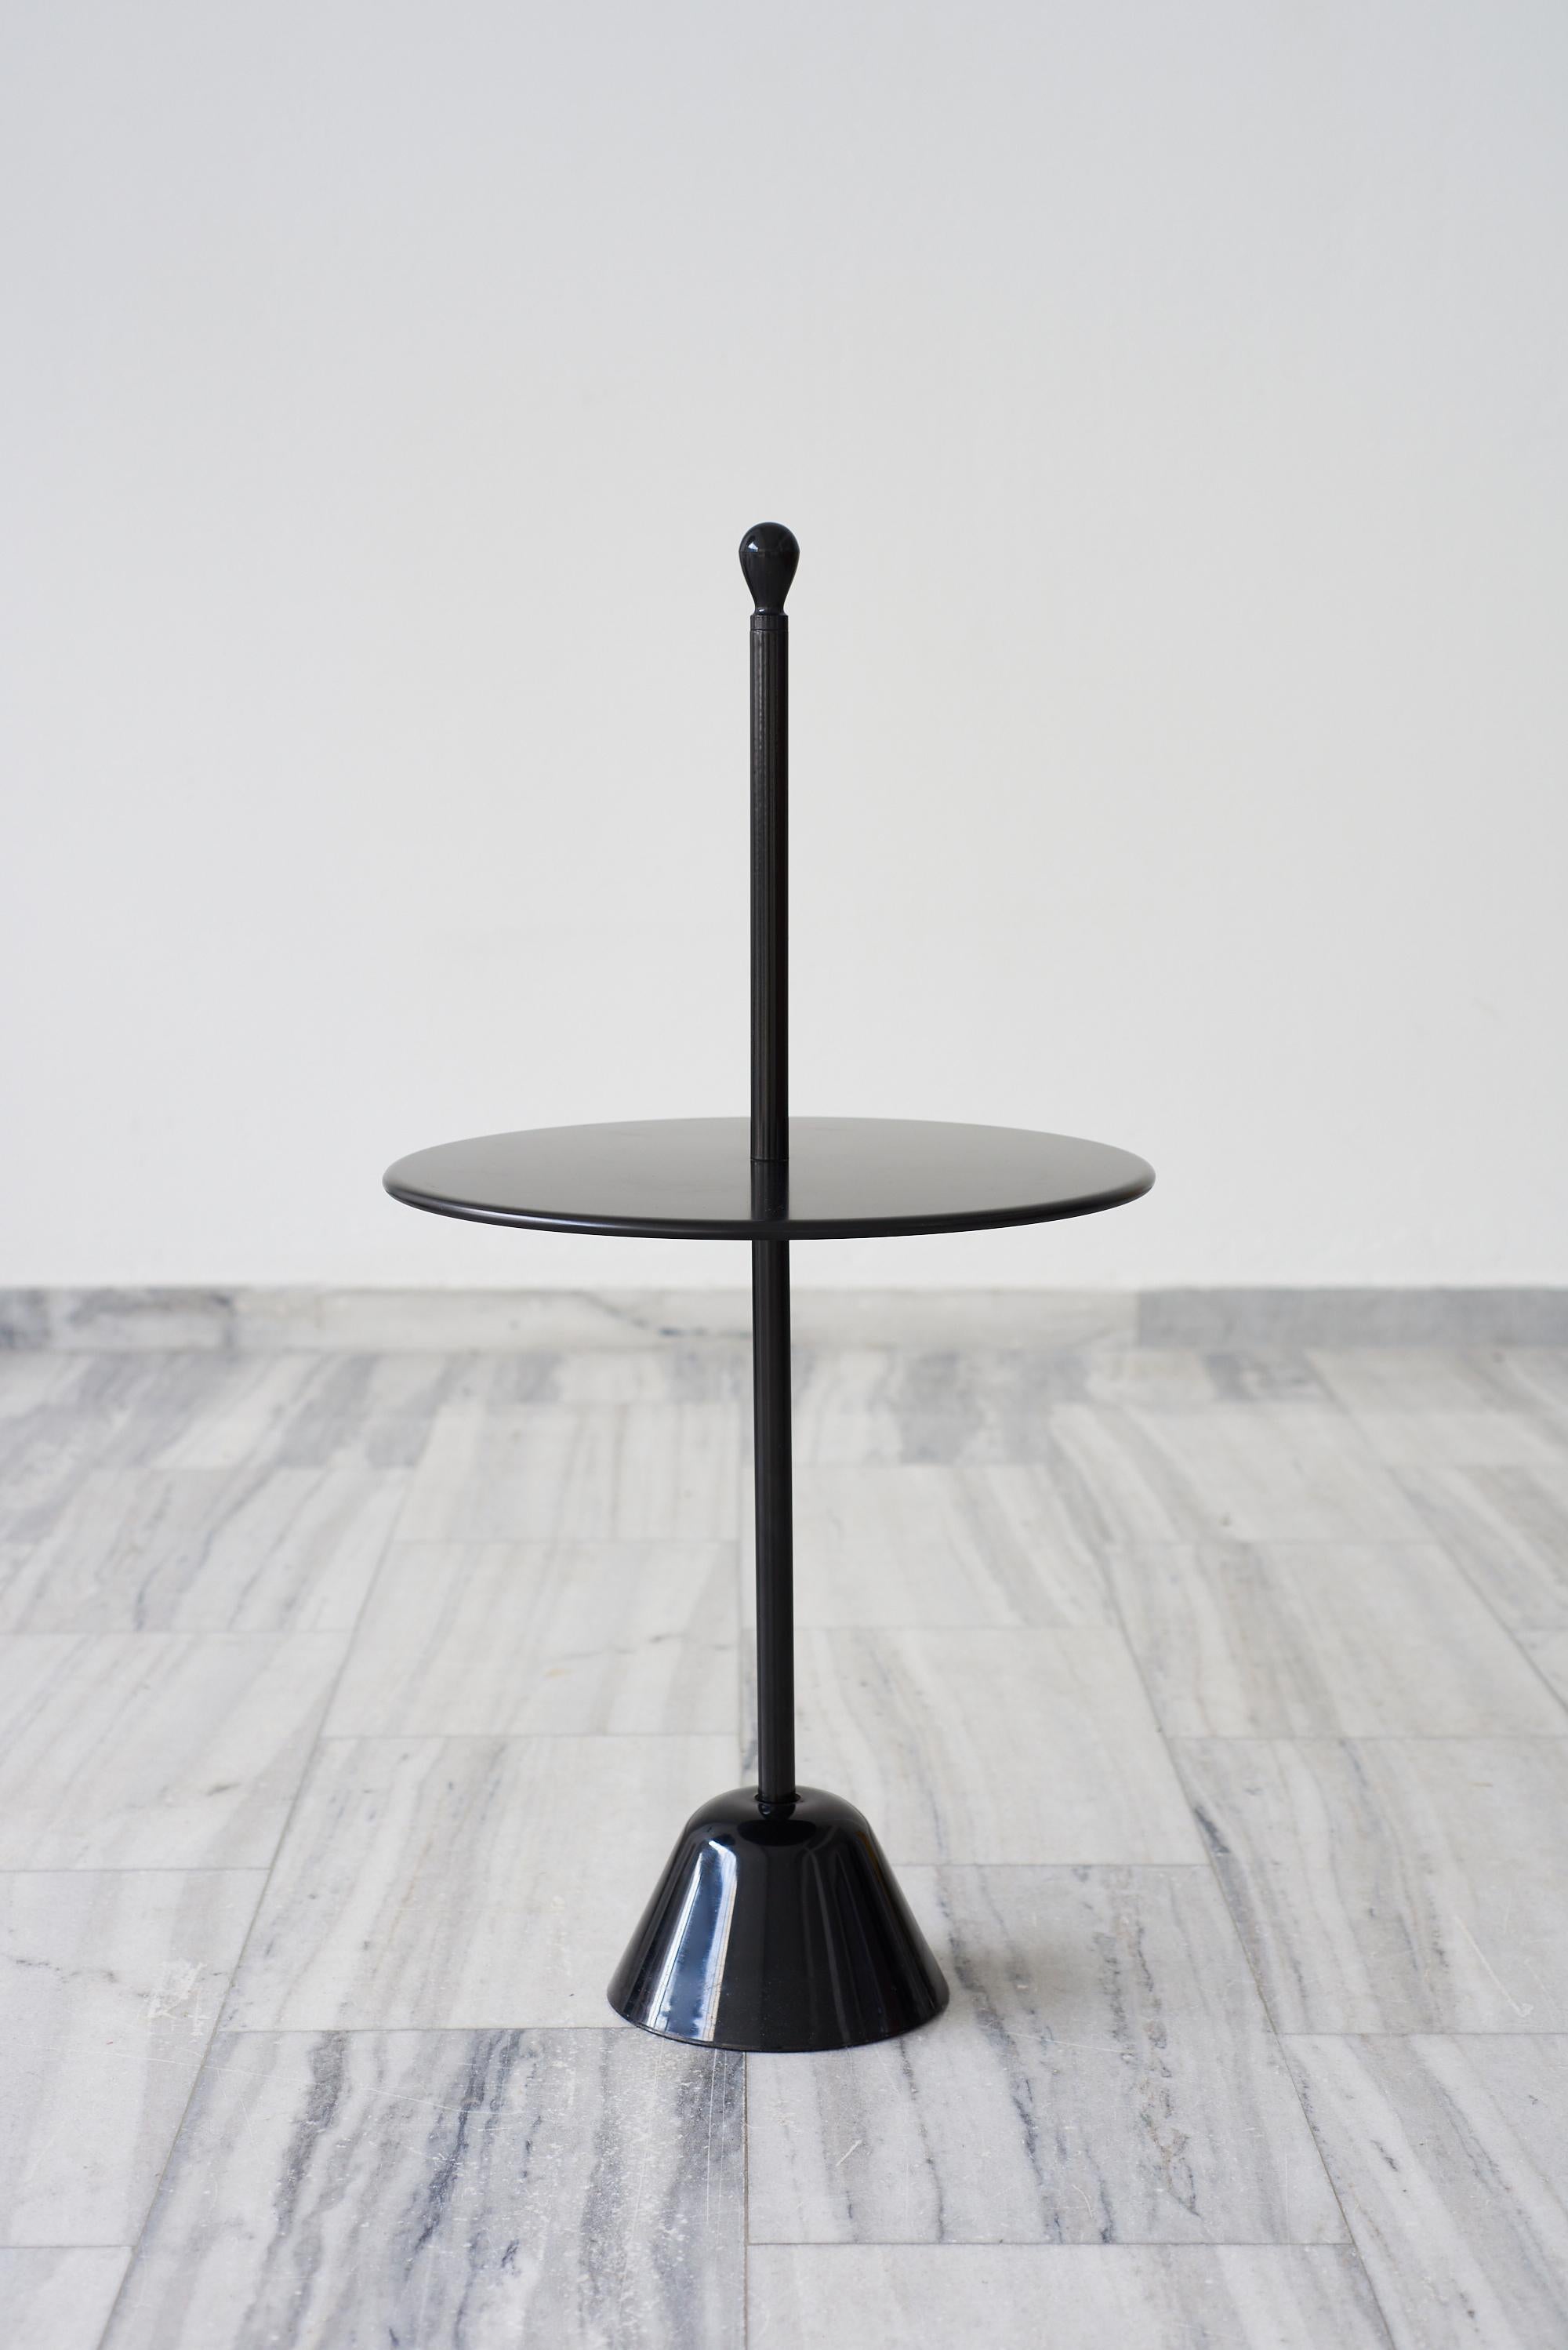 Servomuto table of the range Servi by Achille and Pier Giacomo Castiglioni for Zanotta, 1974.
Servomuto, light and easy to move, is the worthy heir of the essential stylish and balanced Cicognino by Franco Albini. It belongs to a great group of